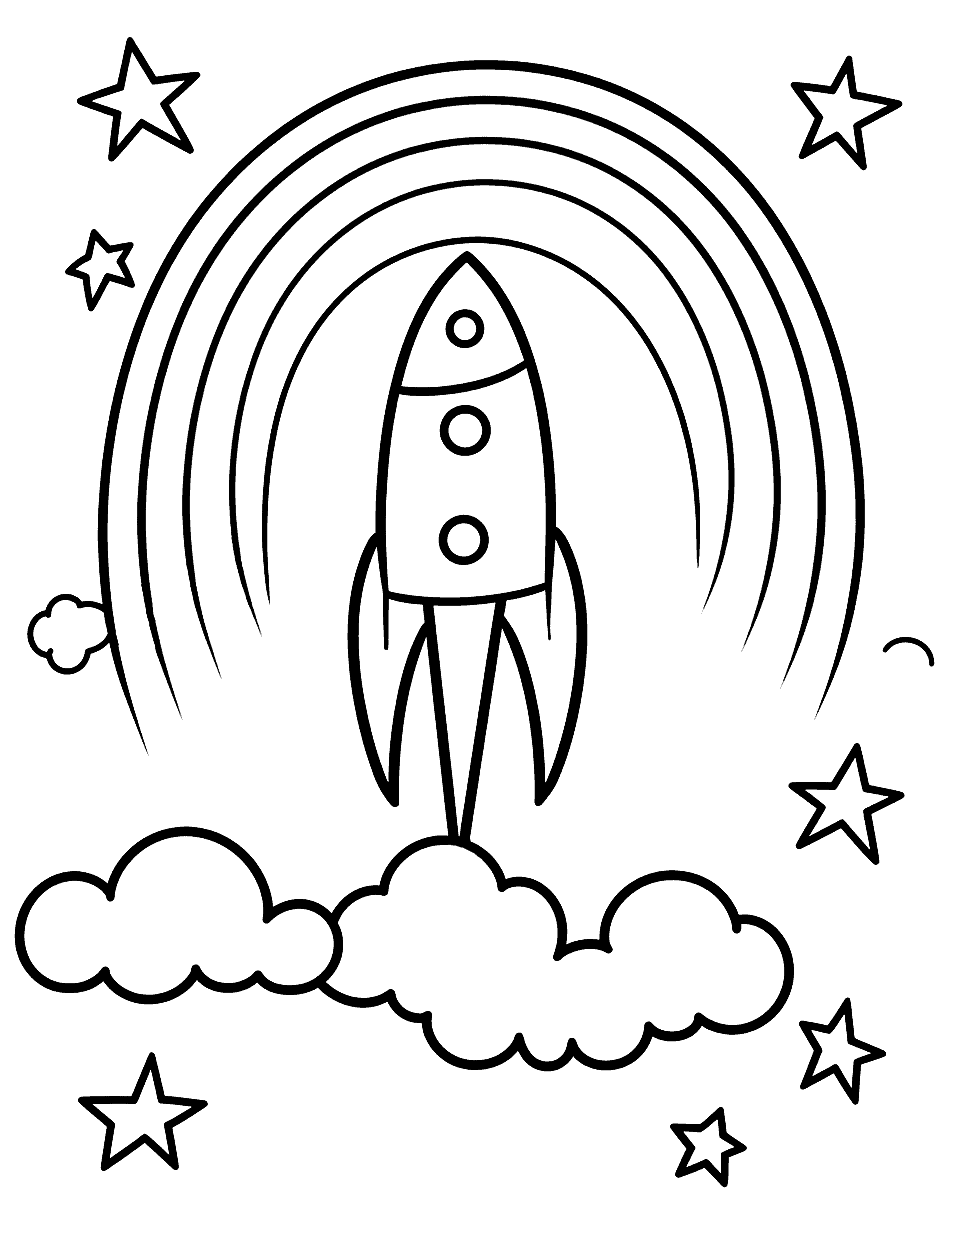 Rainbow Rocket Coloring Page - A rocket soaring through the sky leaving a trail of rainbow colors.